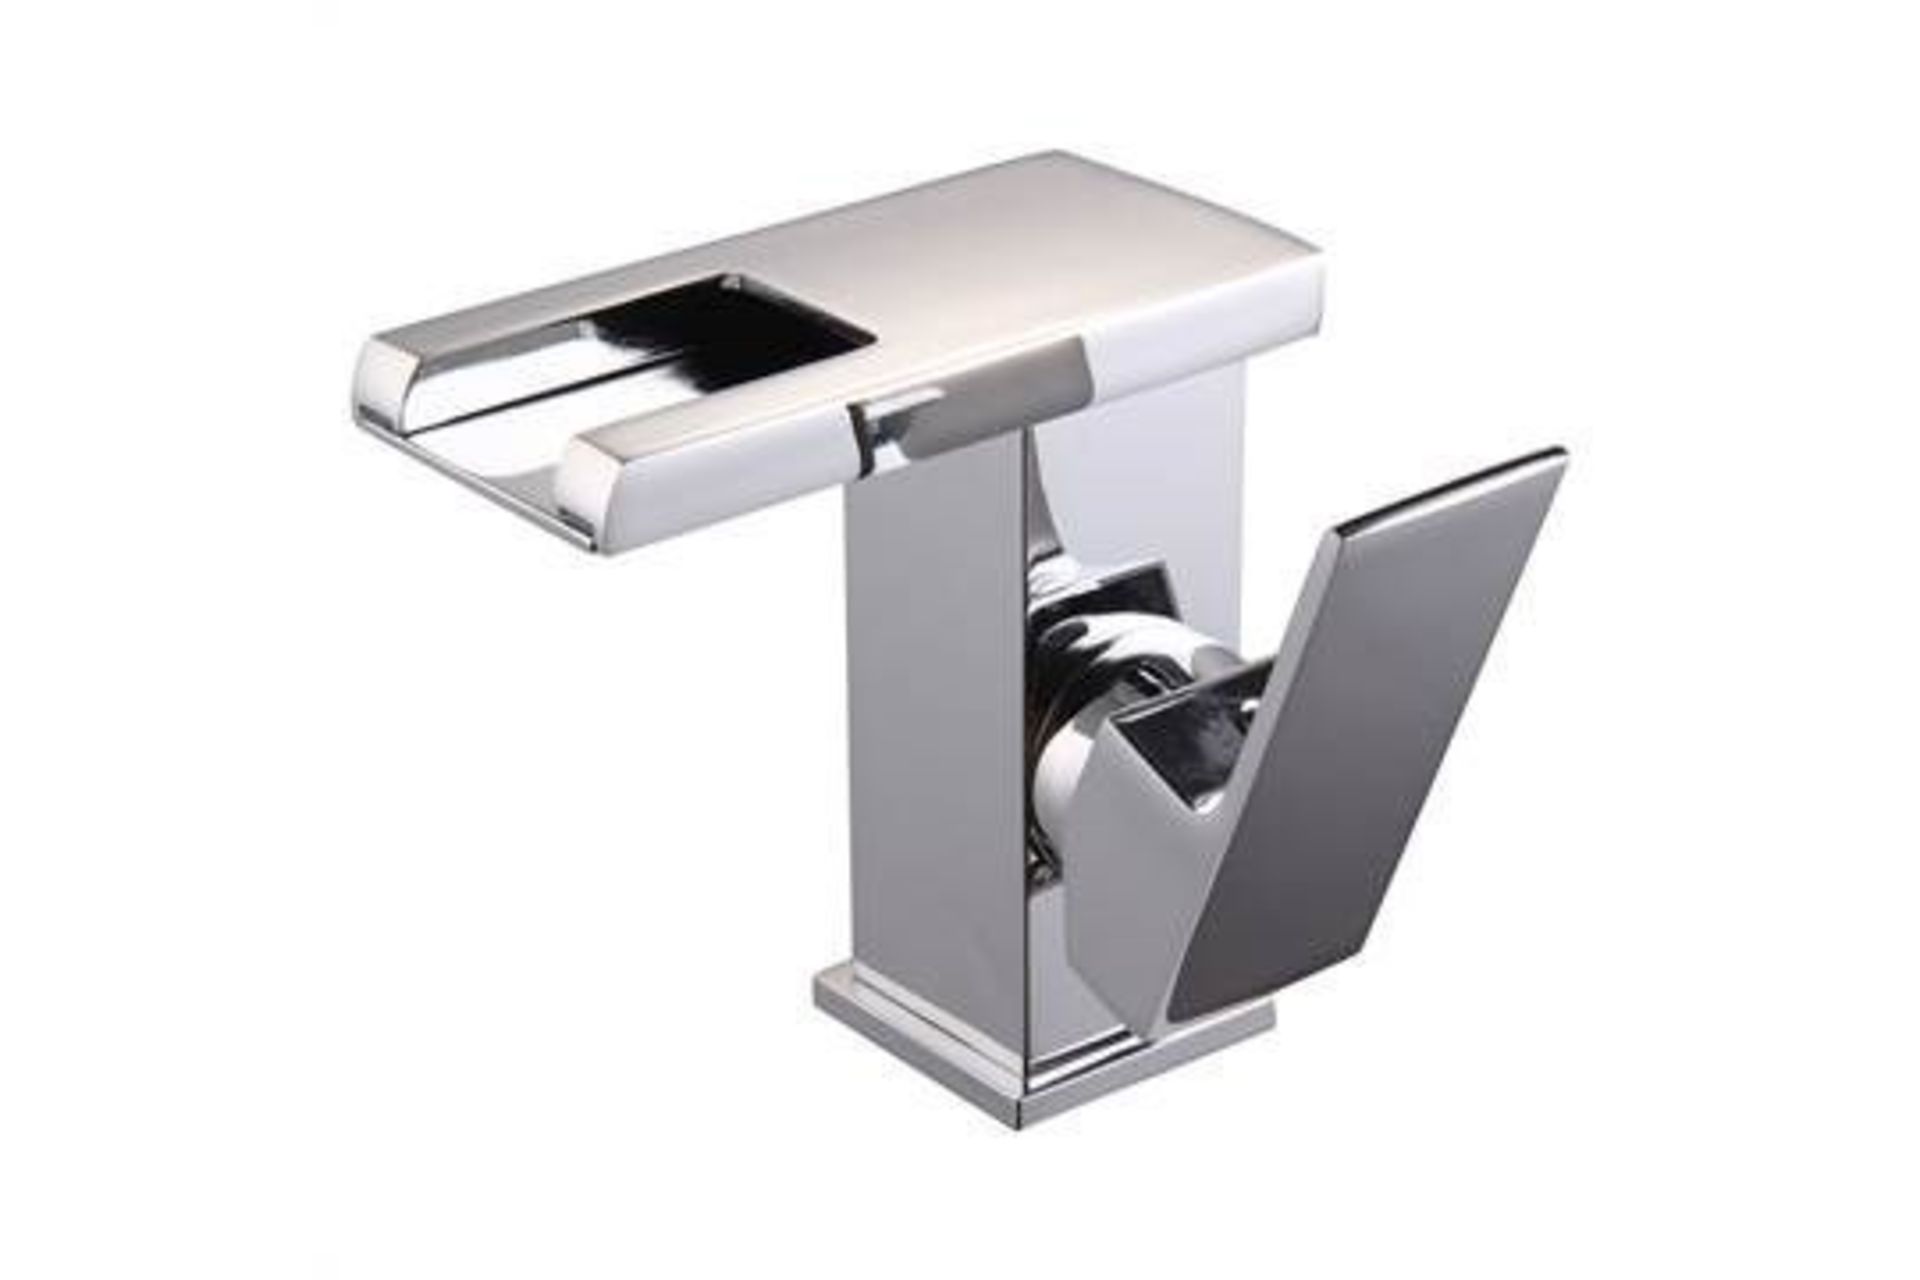 BRAND NEW BOXED - LED Waterfall Bathroom Basin Mixer Tap. RRP £229.99.Easy to install and clea... - Image 2 of 2